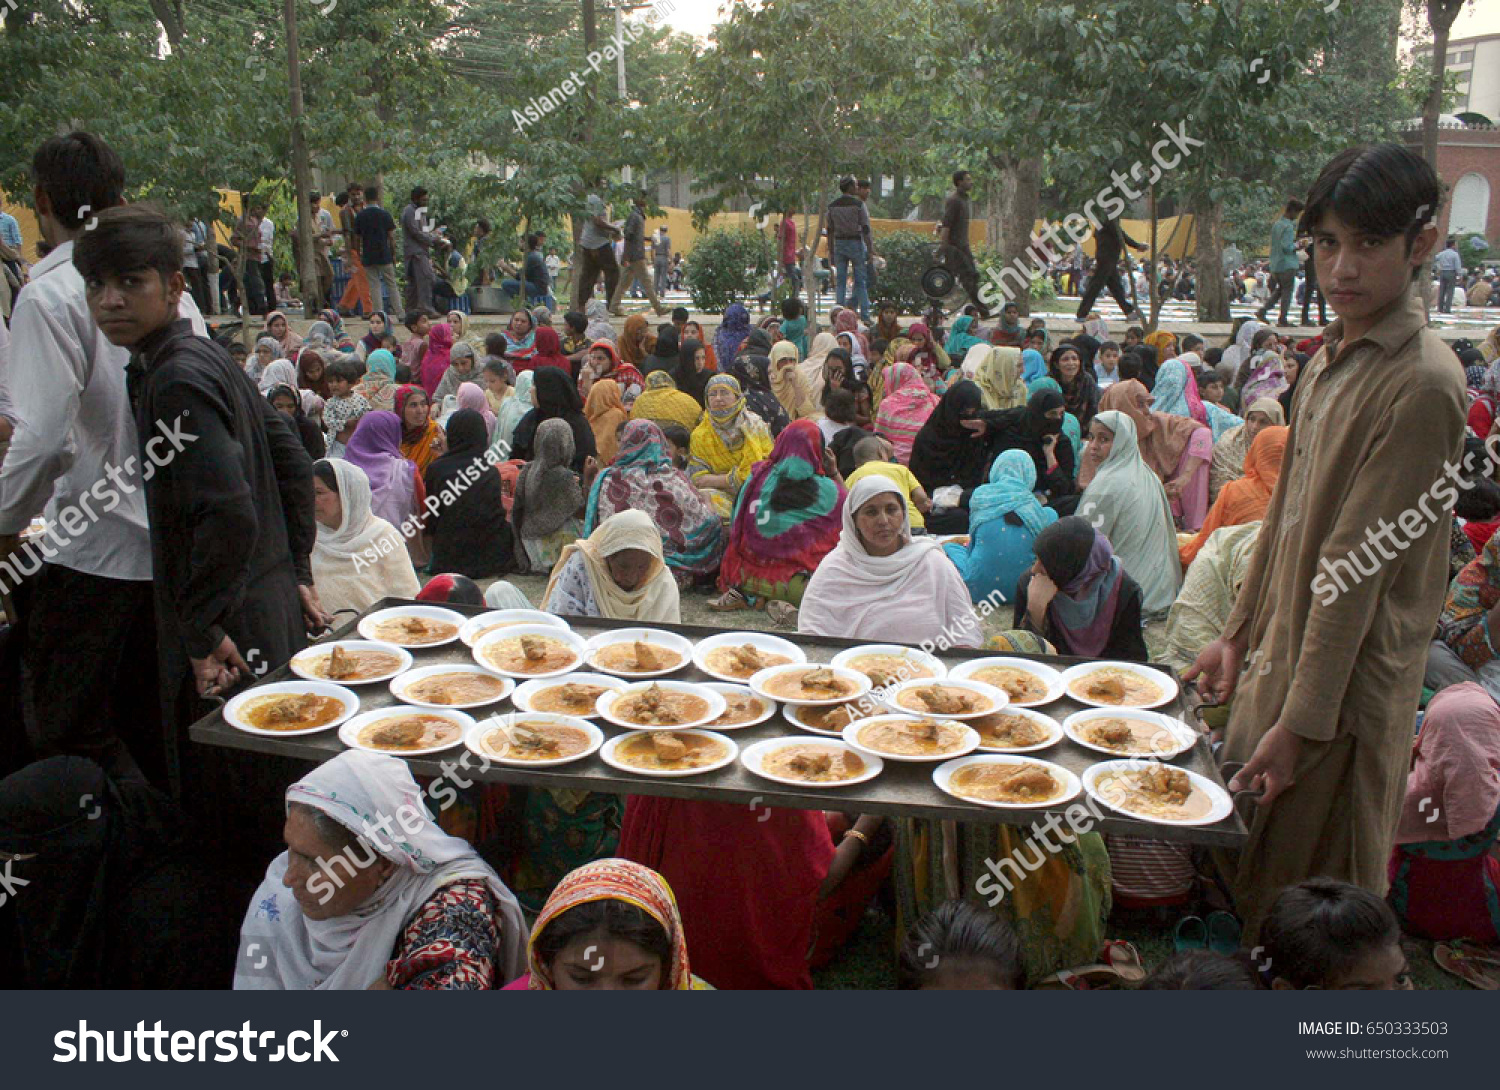 stock-photo-lahore-pakistan-may-muslims-breaking-their-fast-on-the-occasion-of-rd-ramzan-ul-mubarak-at-650333503.jpg